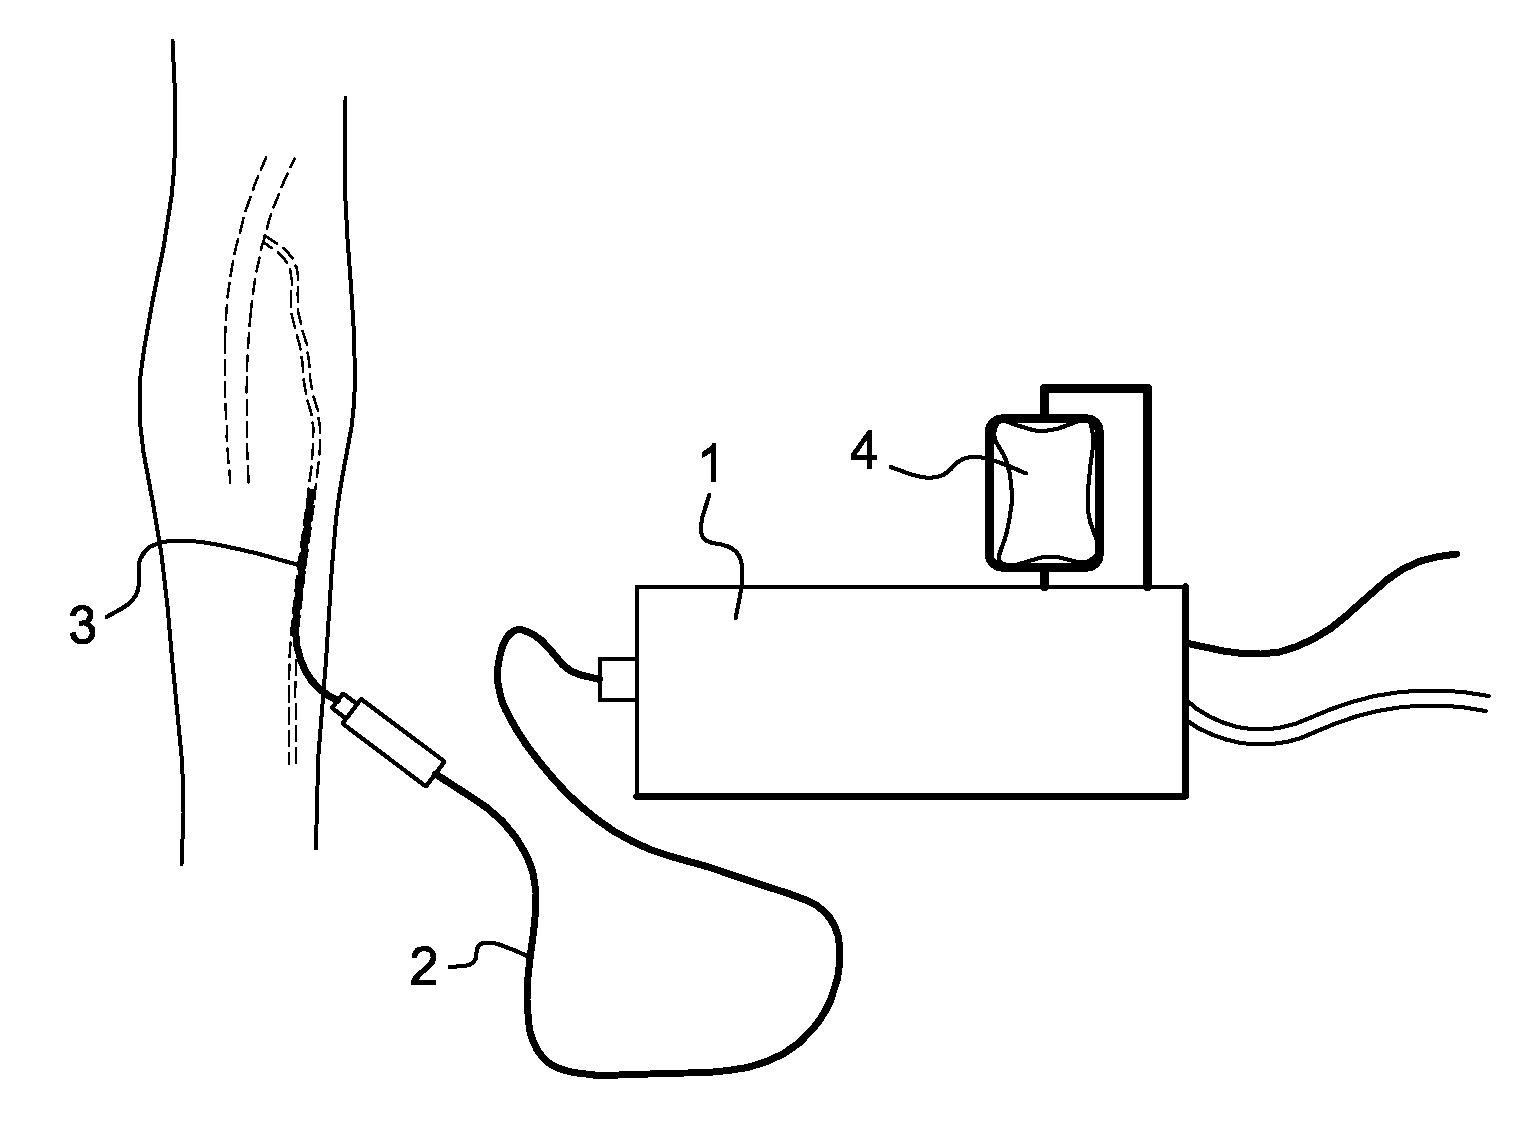 Apparatus for injecting steam into a human or animal blood vessel